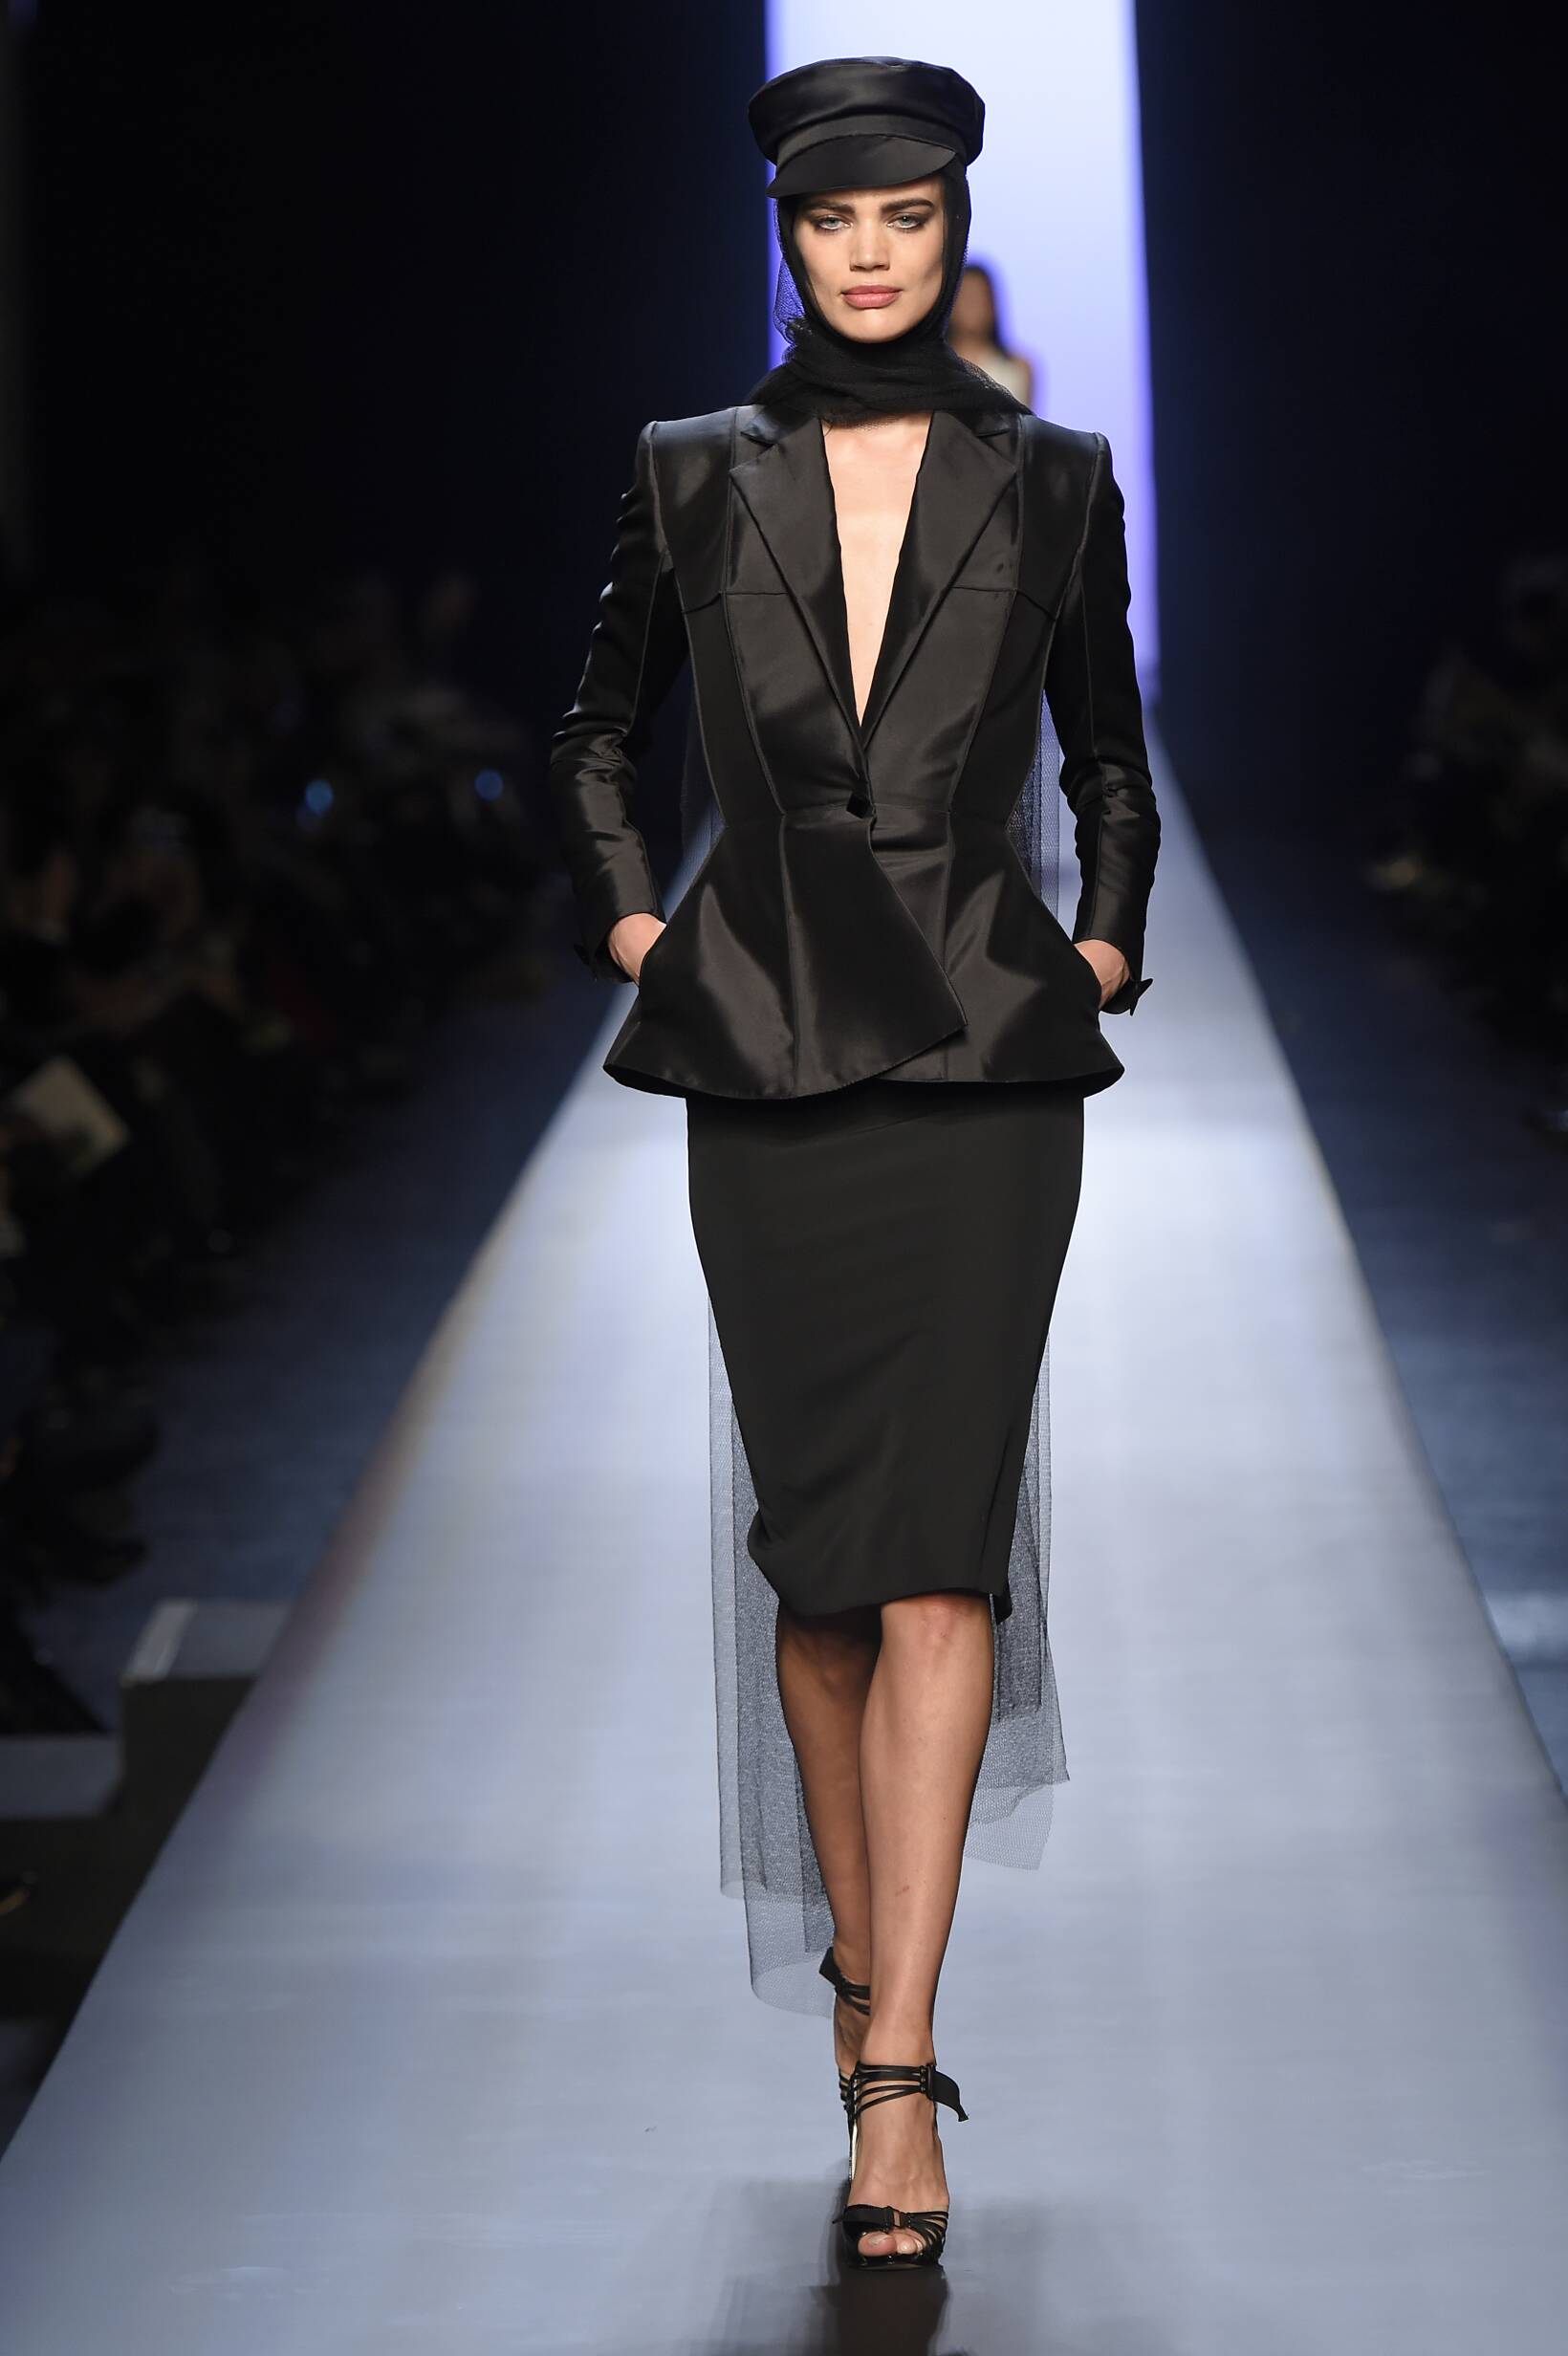 JEAN PAUL GAULTIER HAUTE COUTURE SPRING SUMMER 2015 WOMEN’S COLLECTION ...